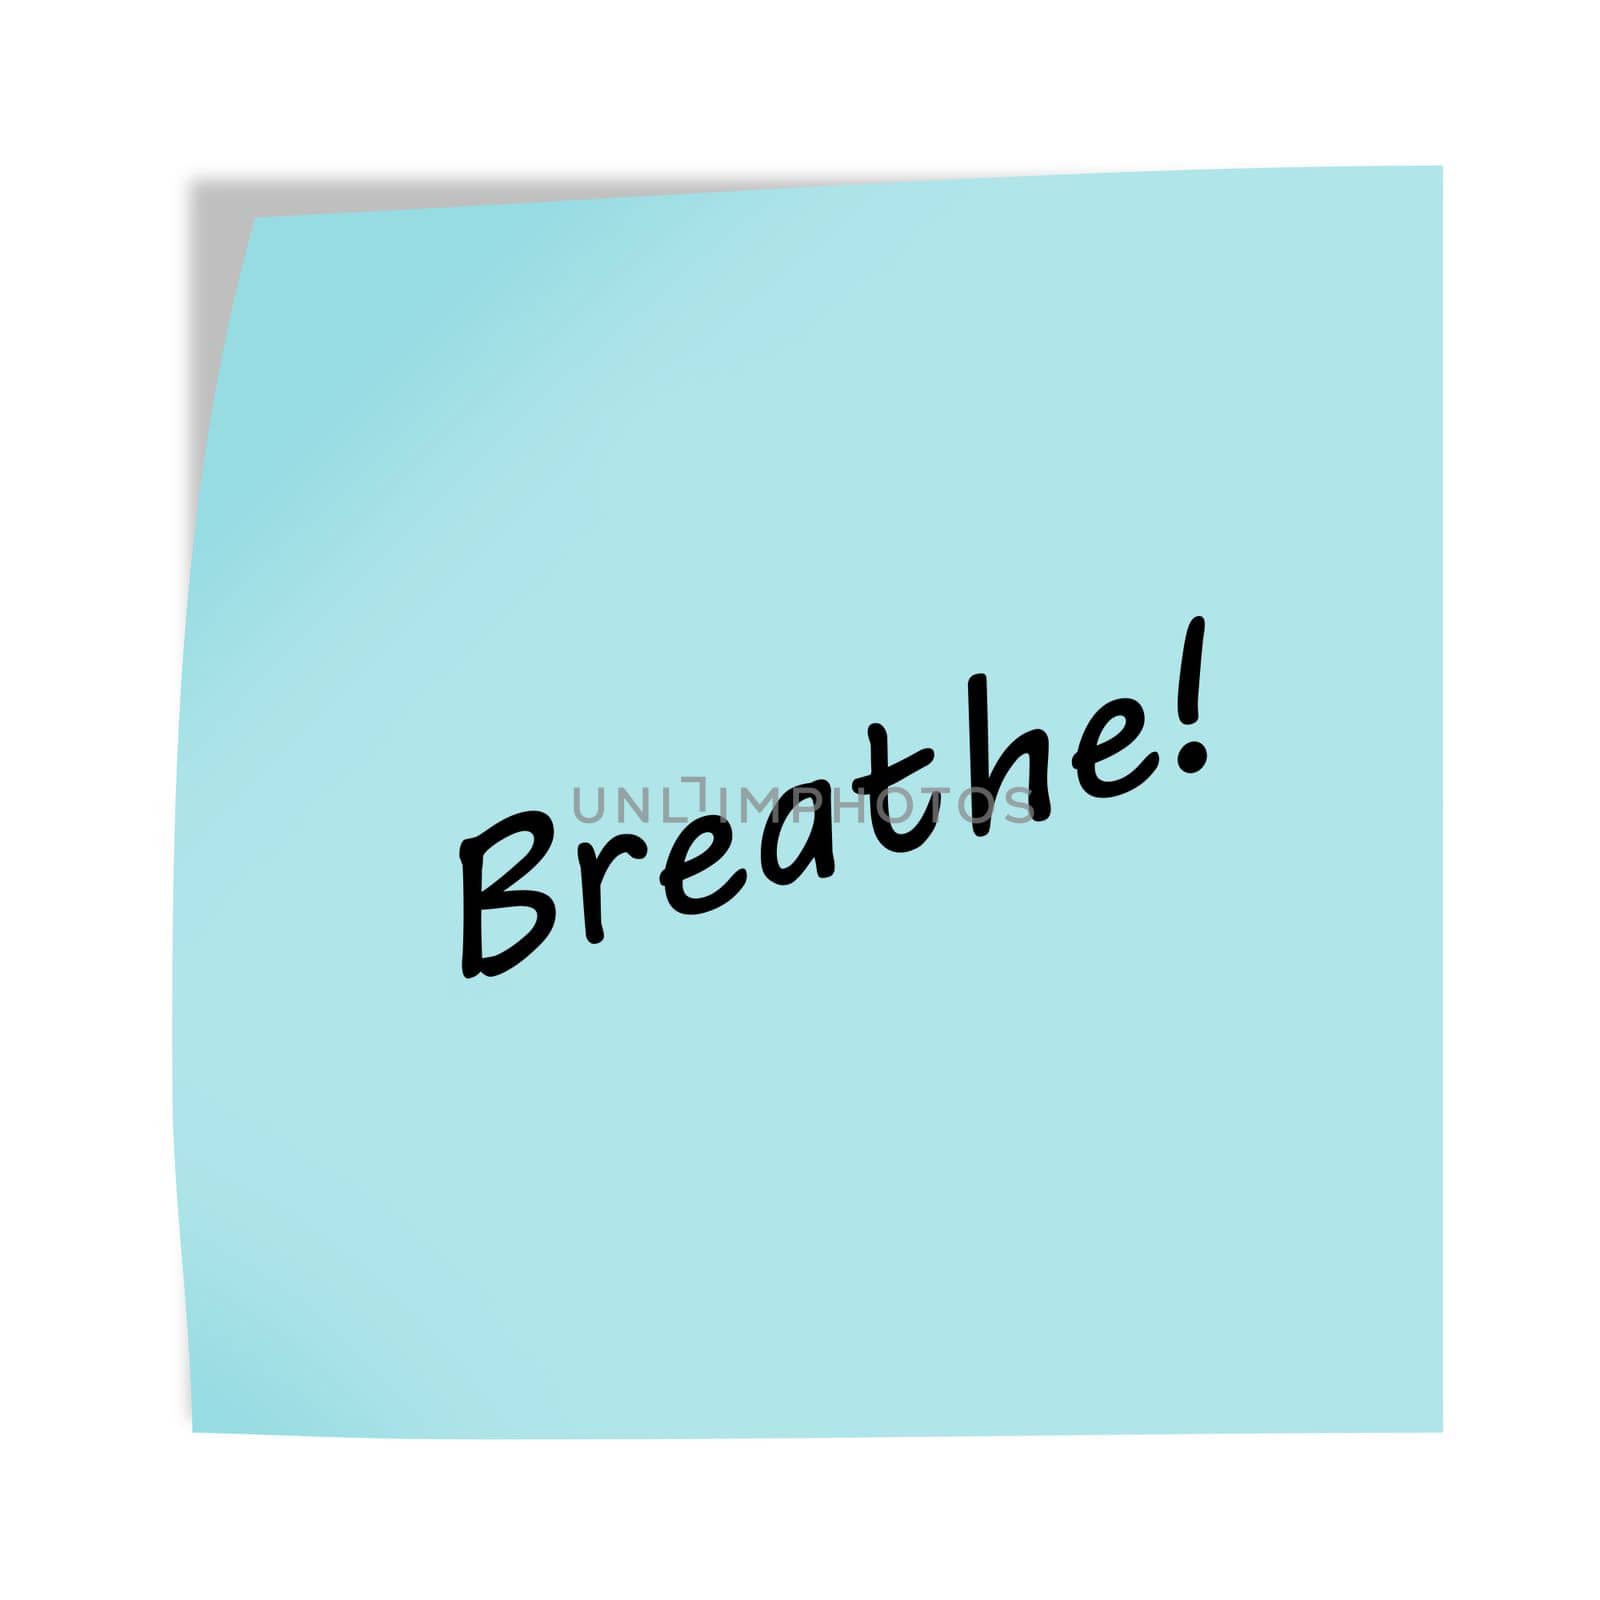 A Breathe 3d illustration post note reminder on white with clipping path